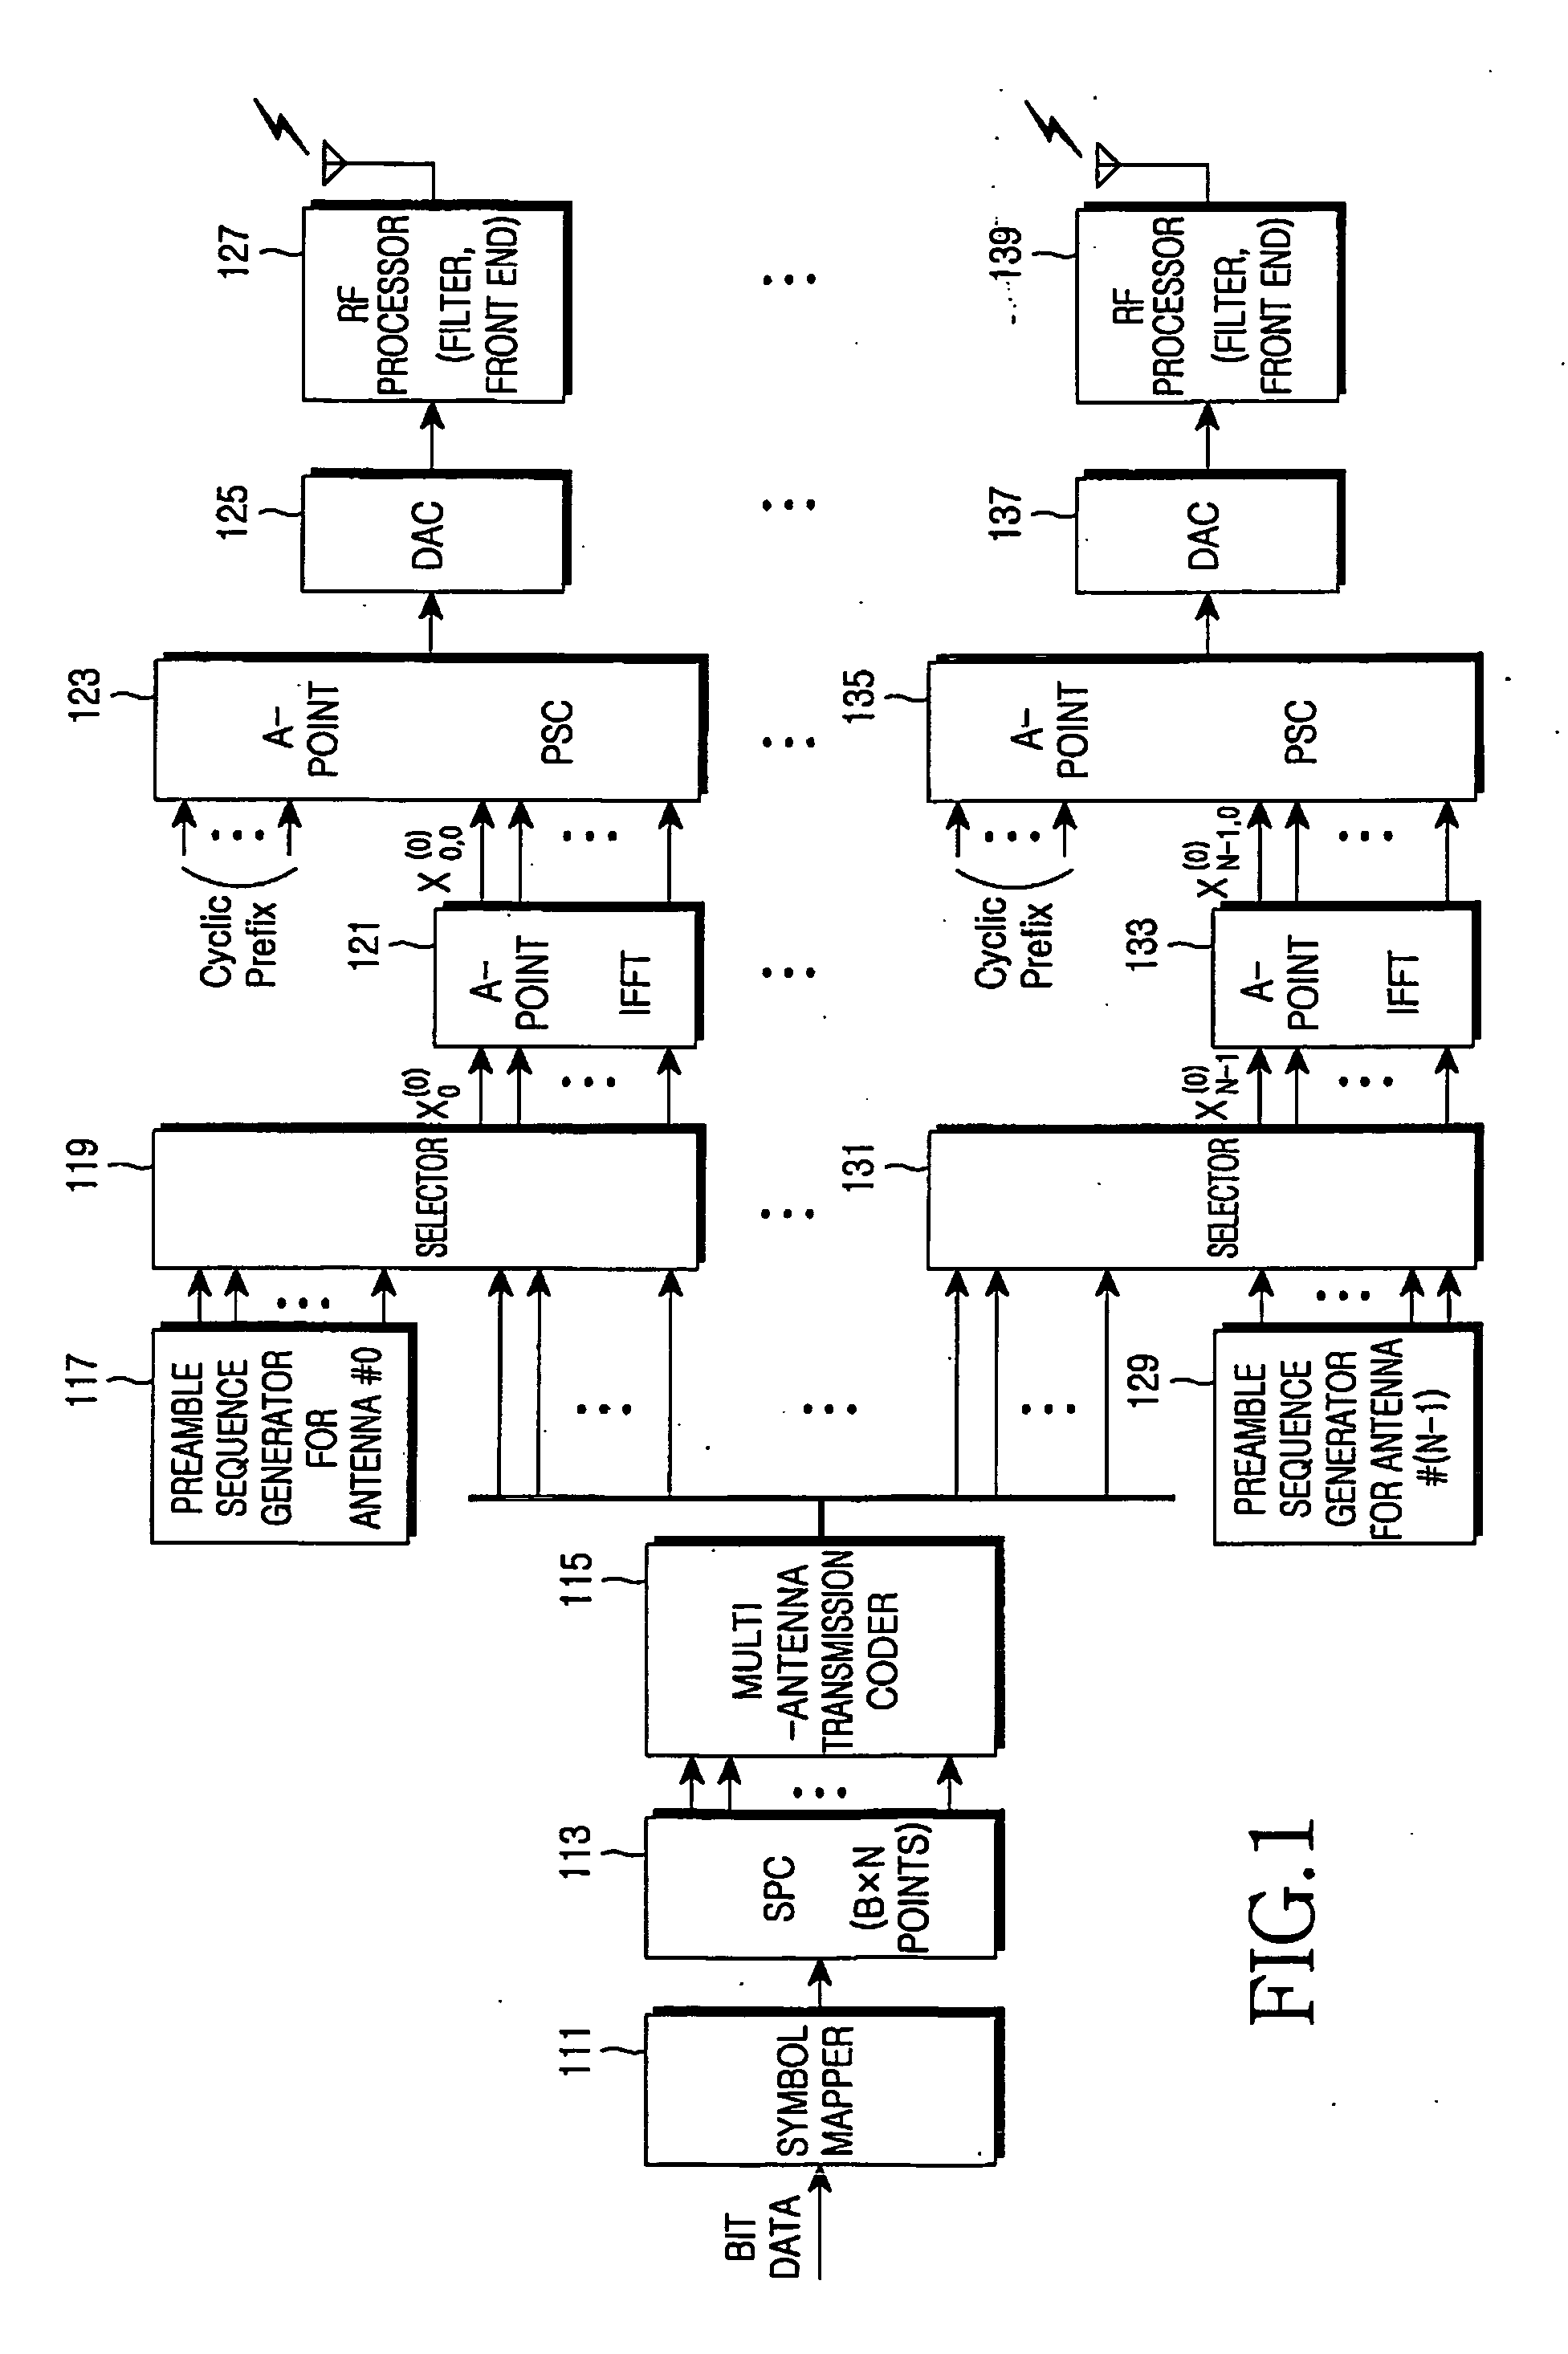 Apparatus and method for channel estimation in an orthogonal frequency division multiplexing cellular communication system using multiple transmit antennas